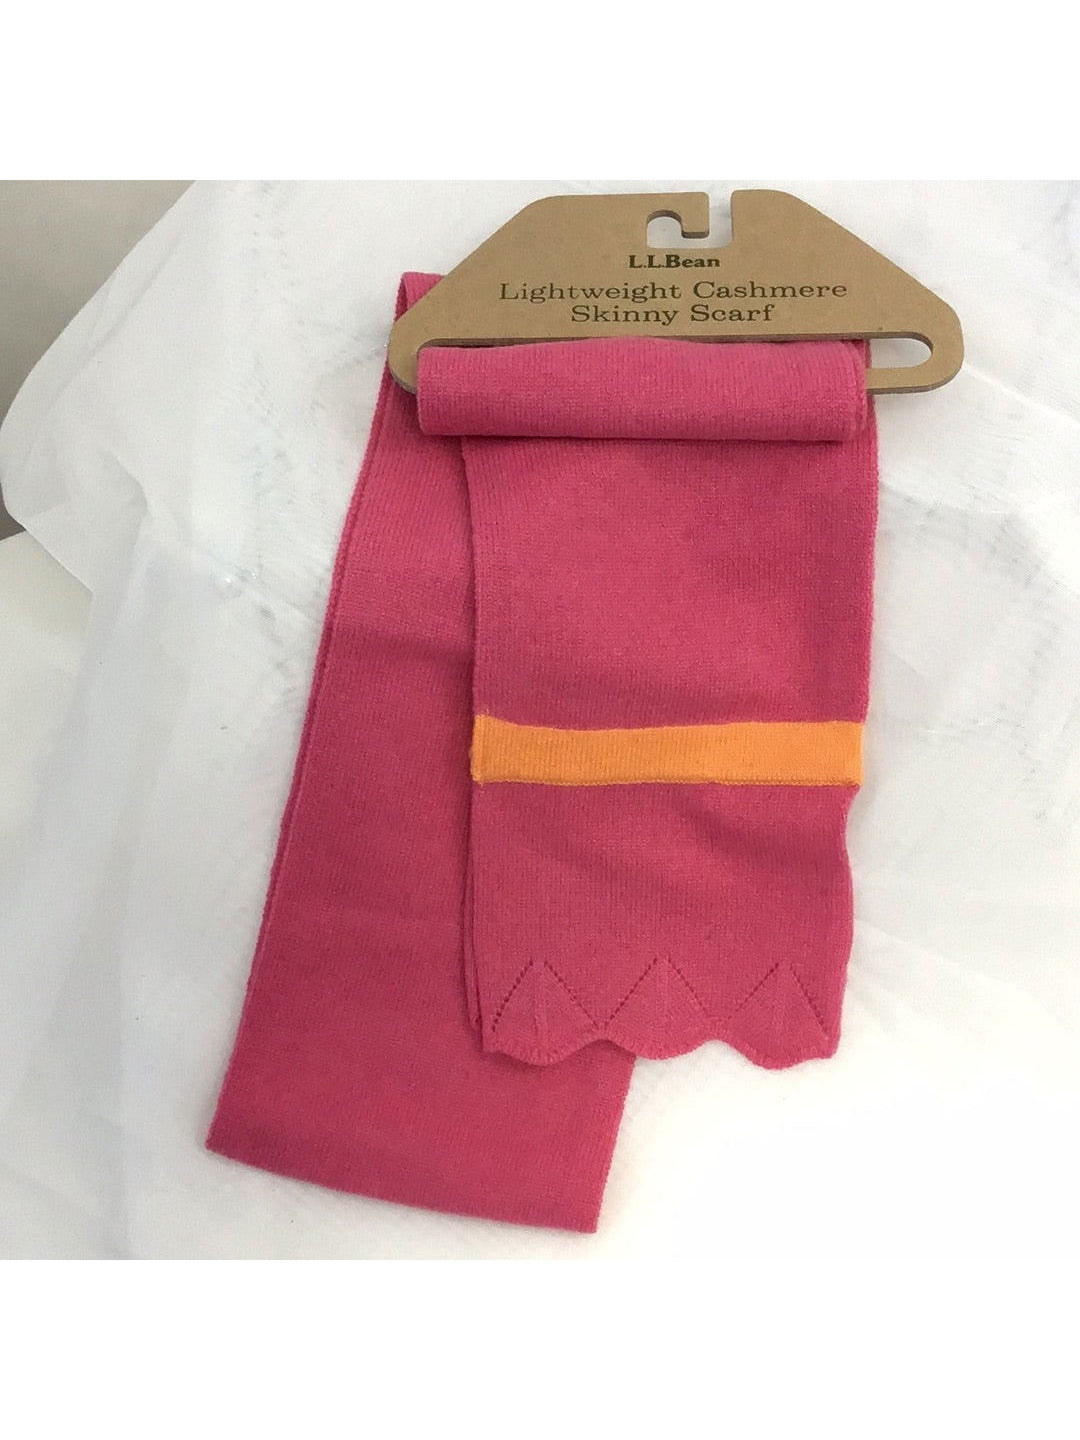 L.L. Bean Casual Skinny Scarf - NWT - The Kennedy Collective Thrift - 